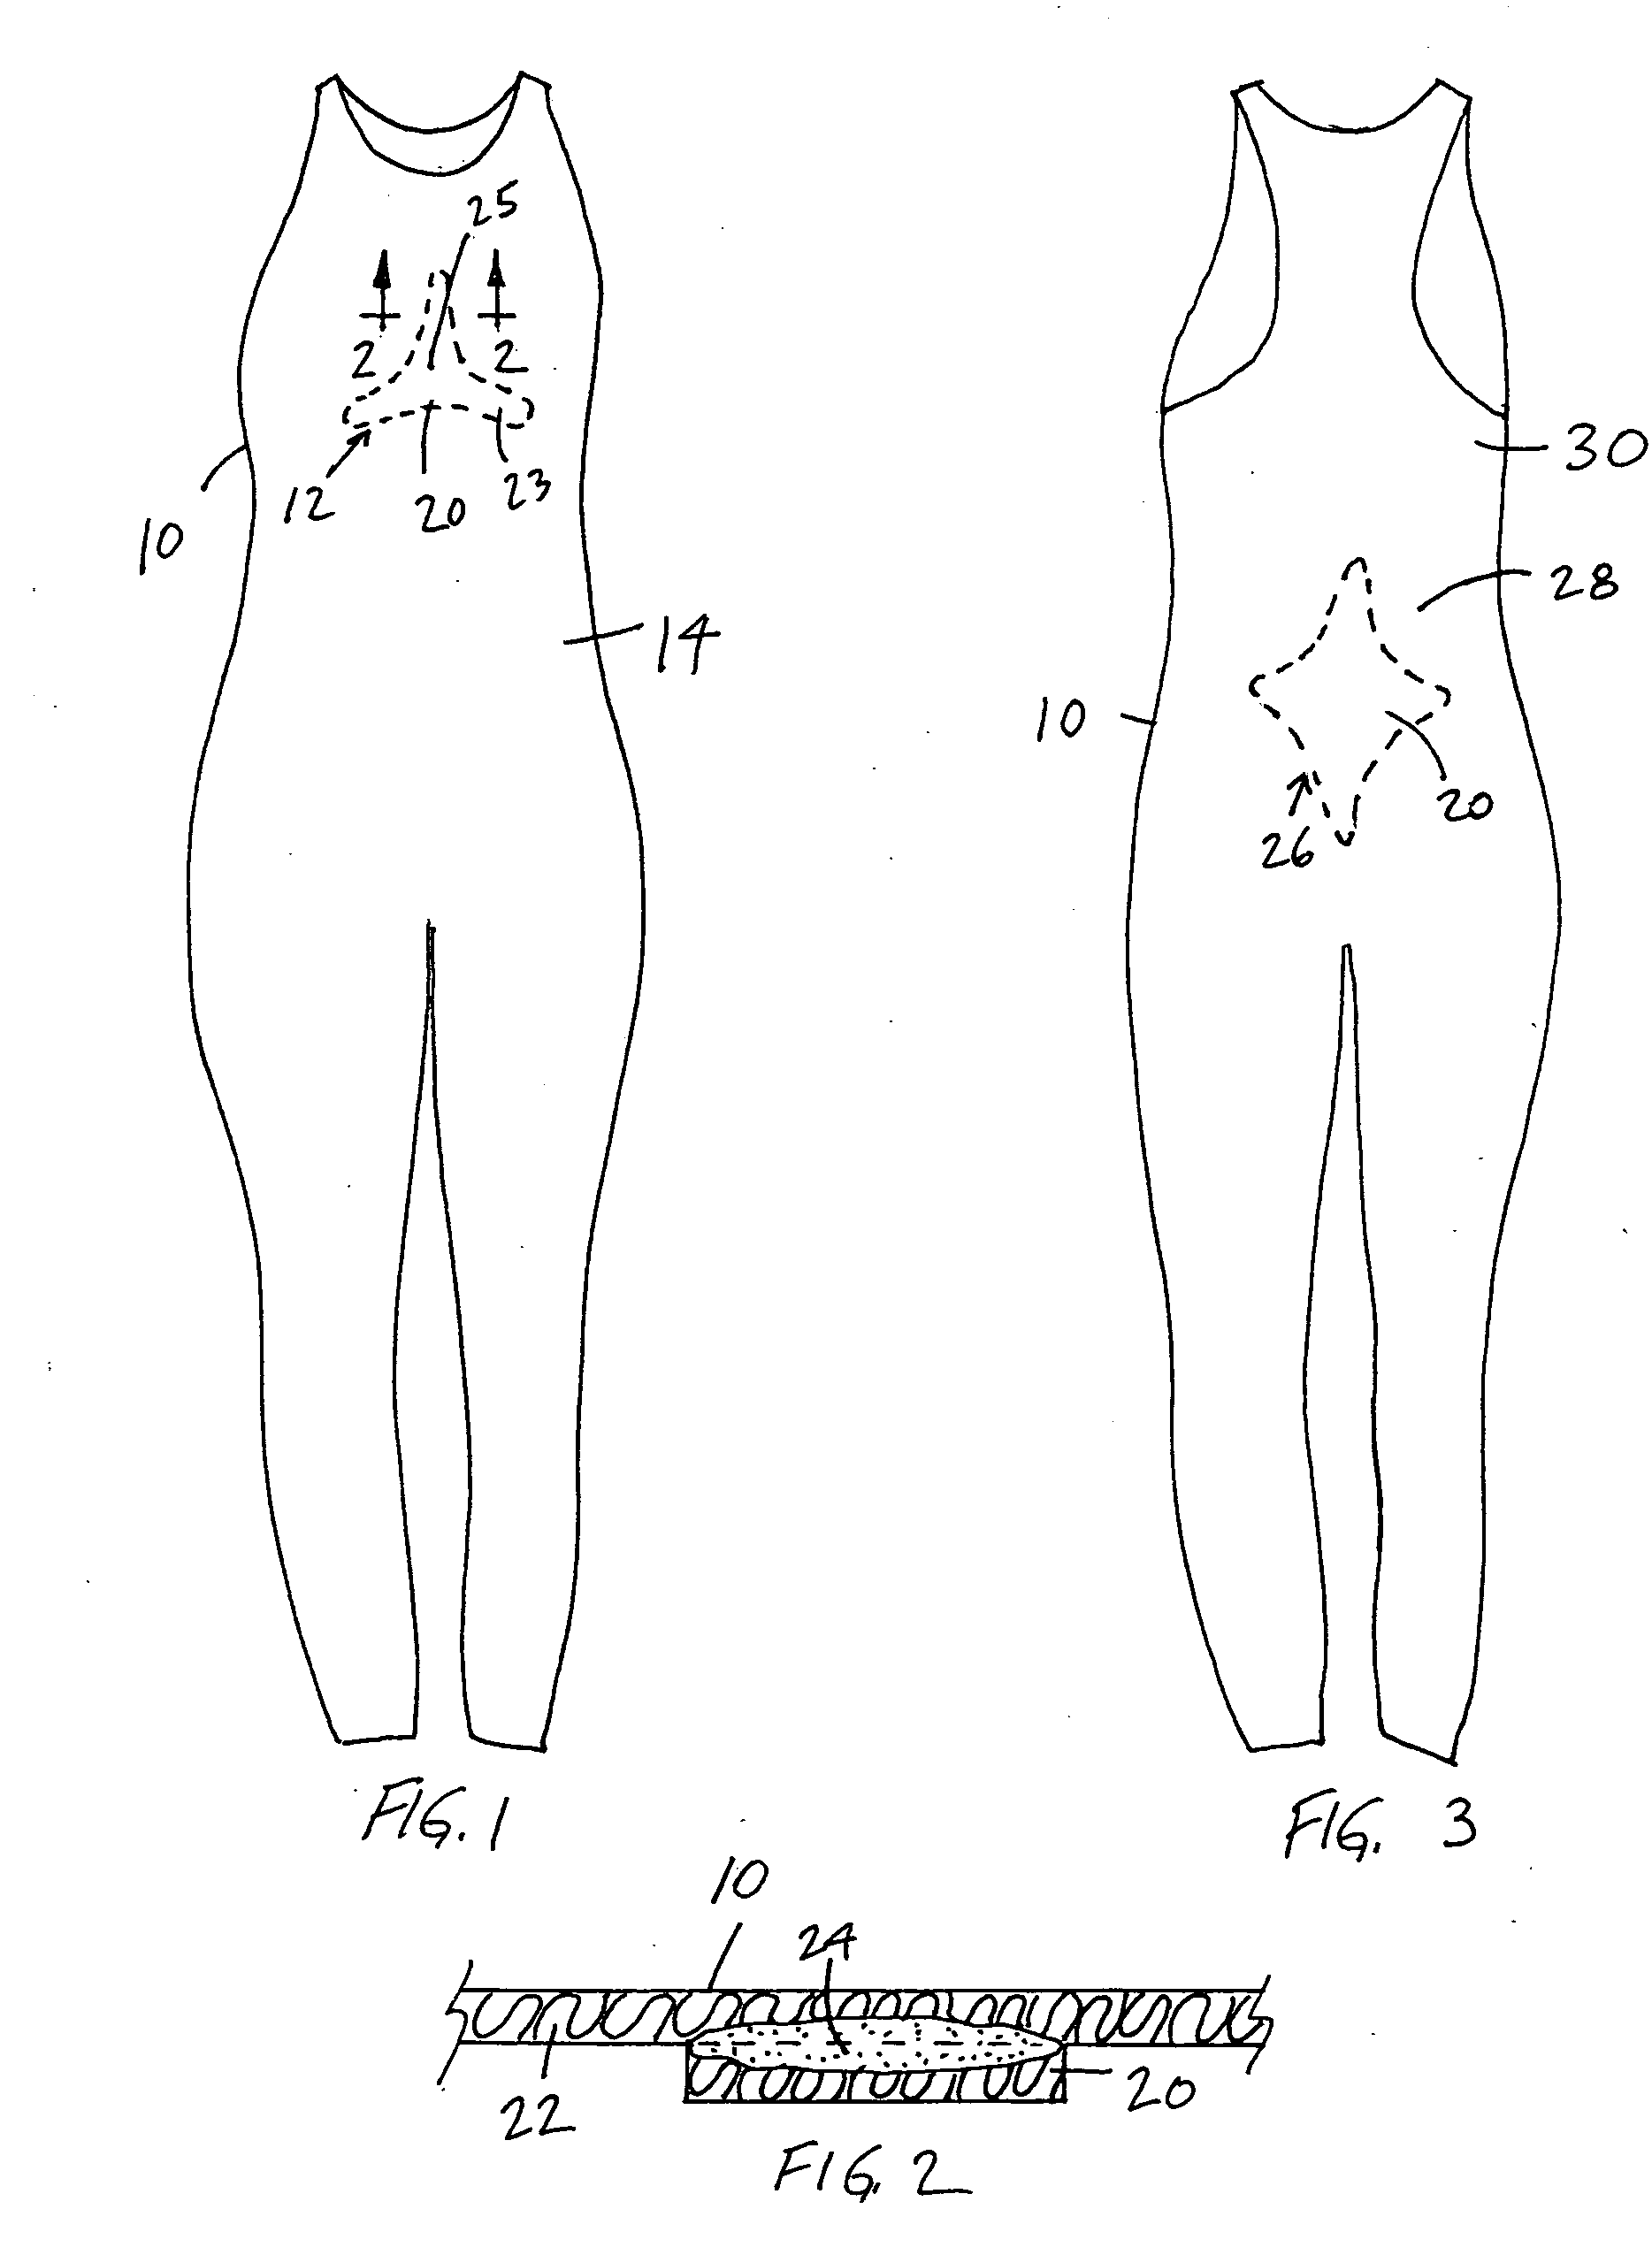 Article of apparel with areas of increased tension